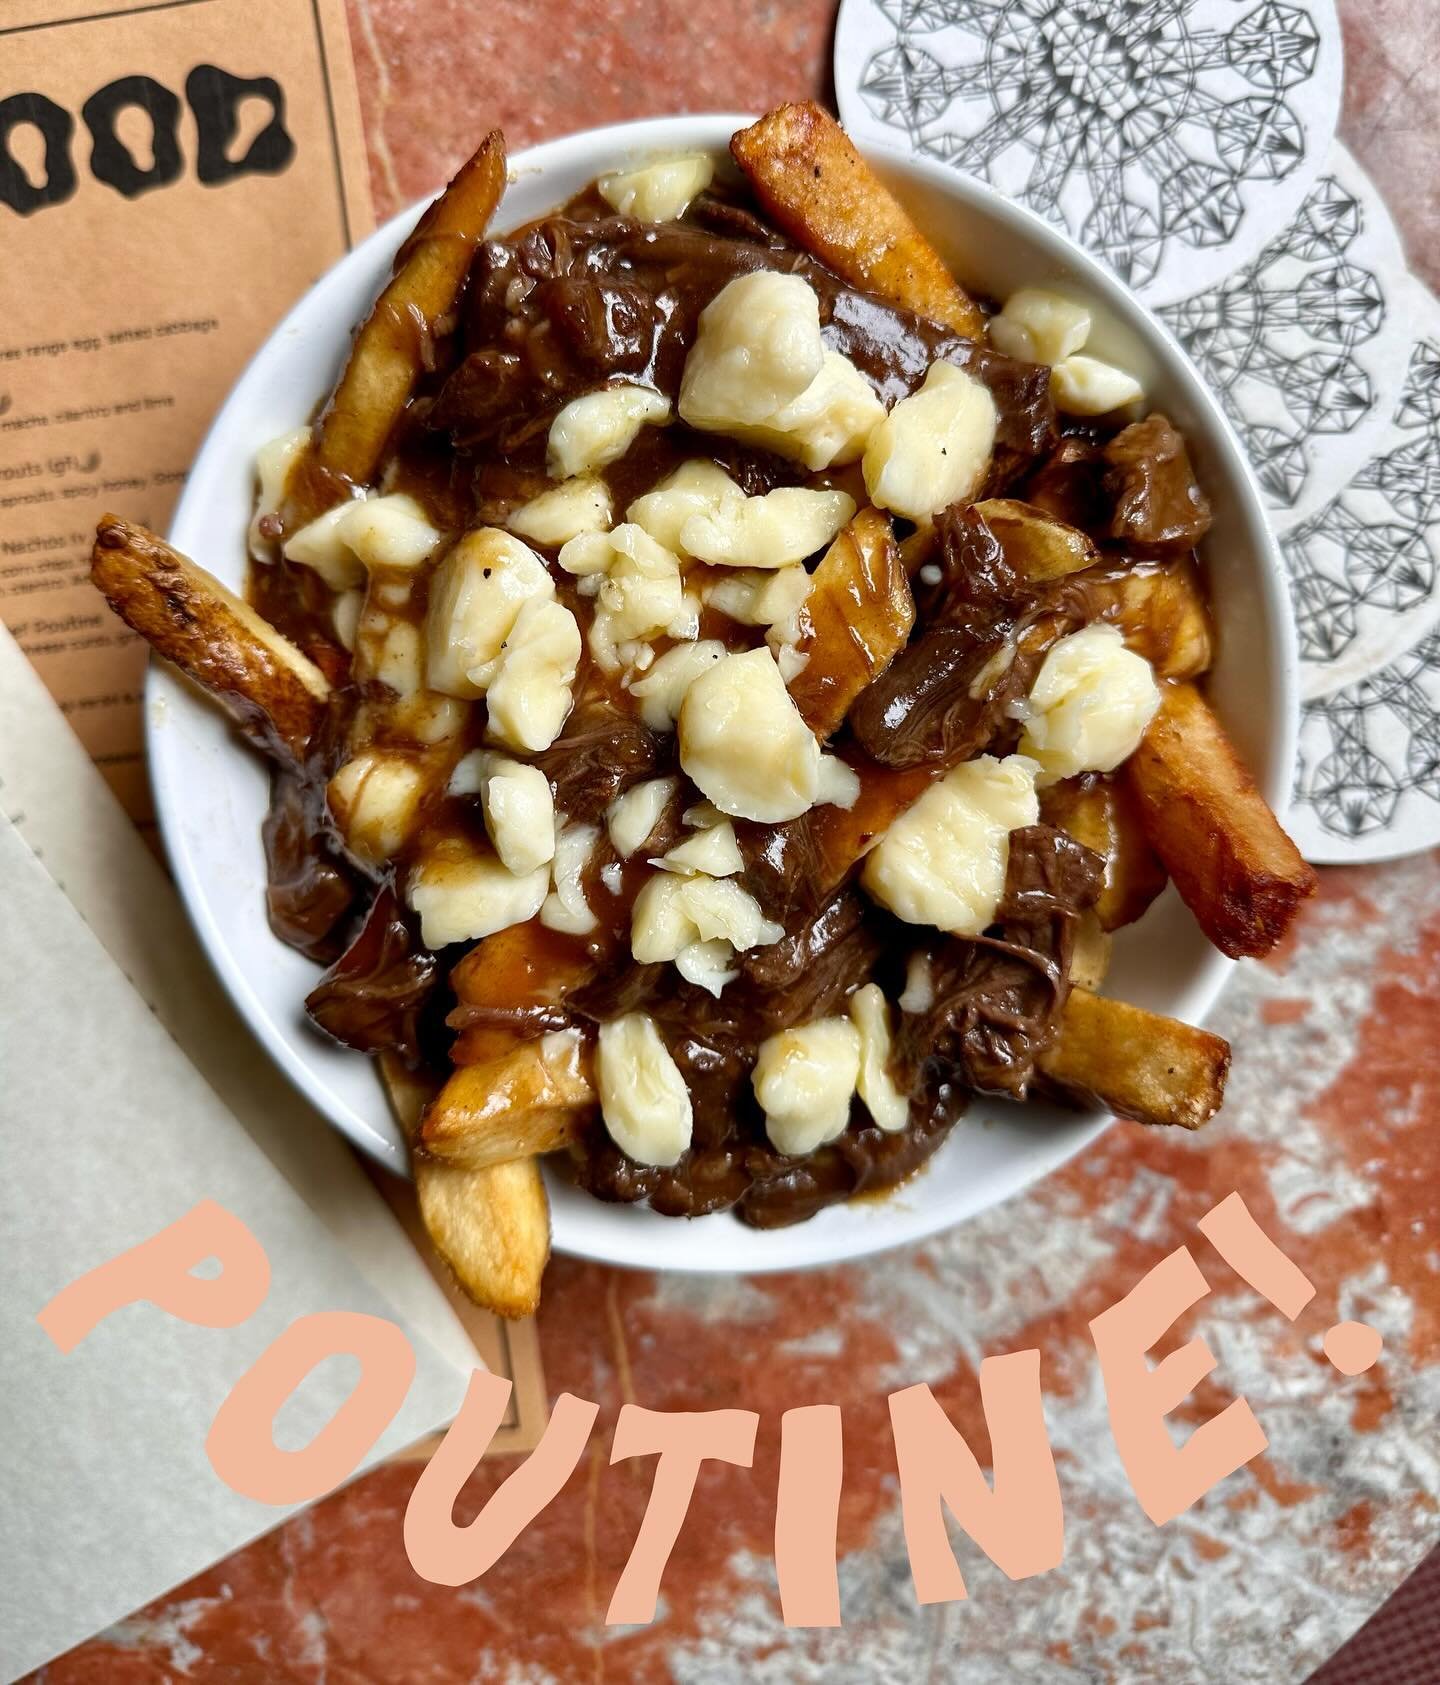 Braised beef, cheese curds, gravy &amp; fat chips! 💫

Go ahead and drink as much as you like this weekend, we&rsquo;ve got you covered 🥴🙏😋